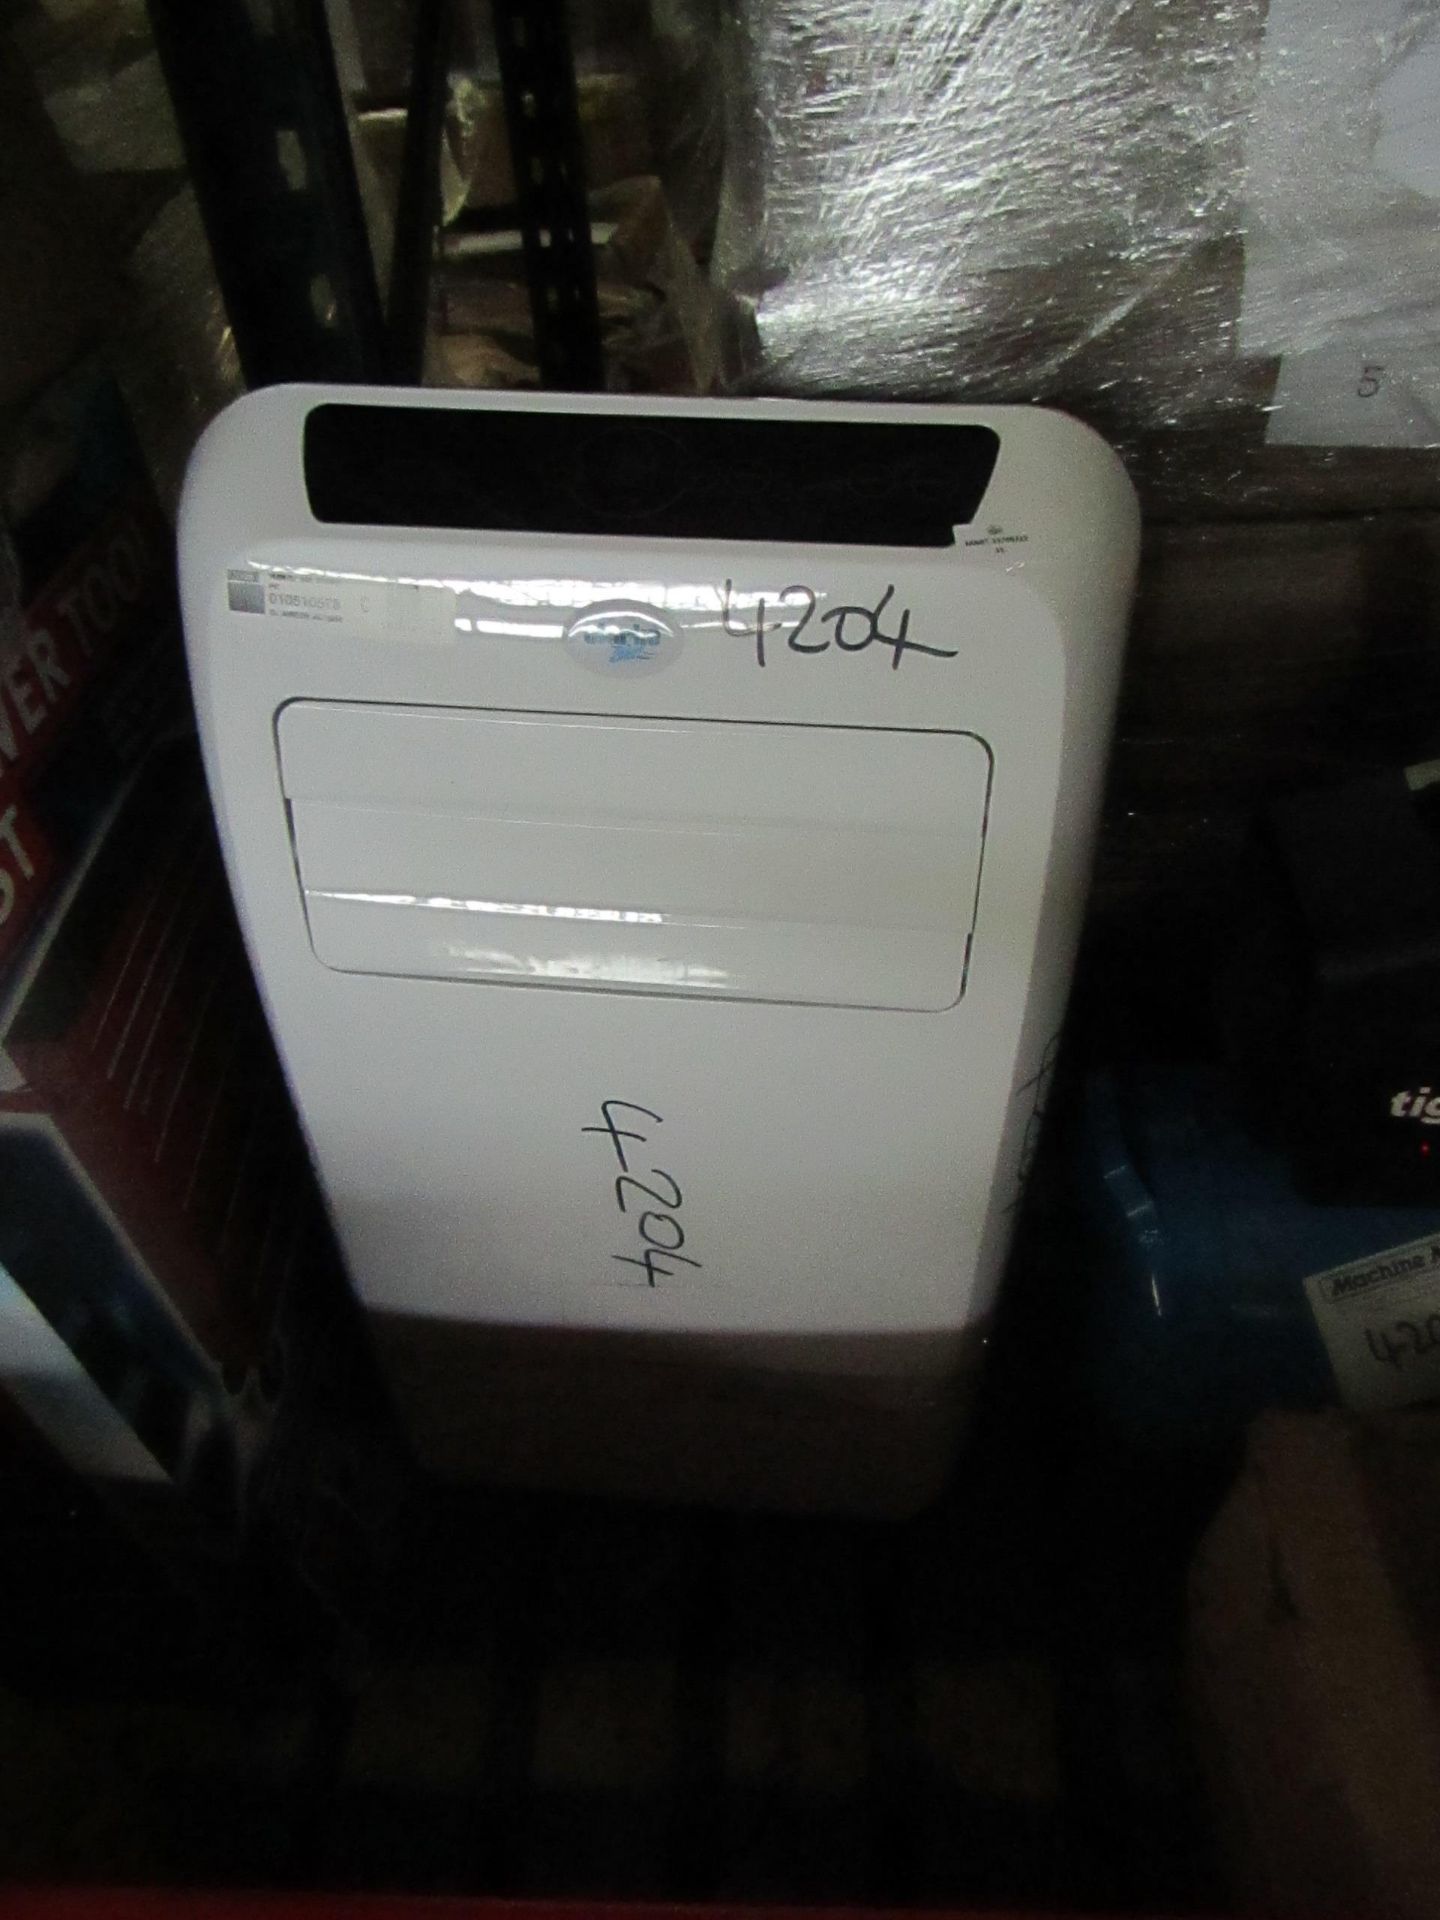 1x CL AIRCON AC13050 23 4204 This lot is a Machine Mart product which is raw and completely